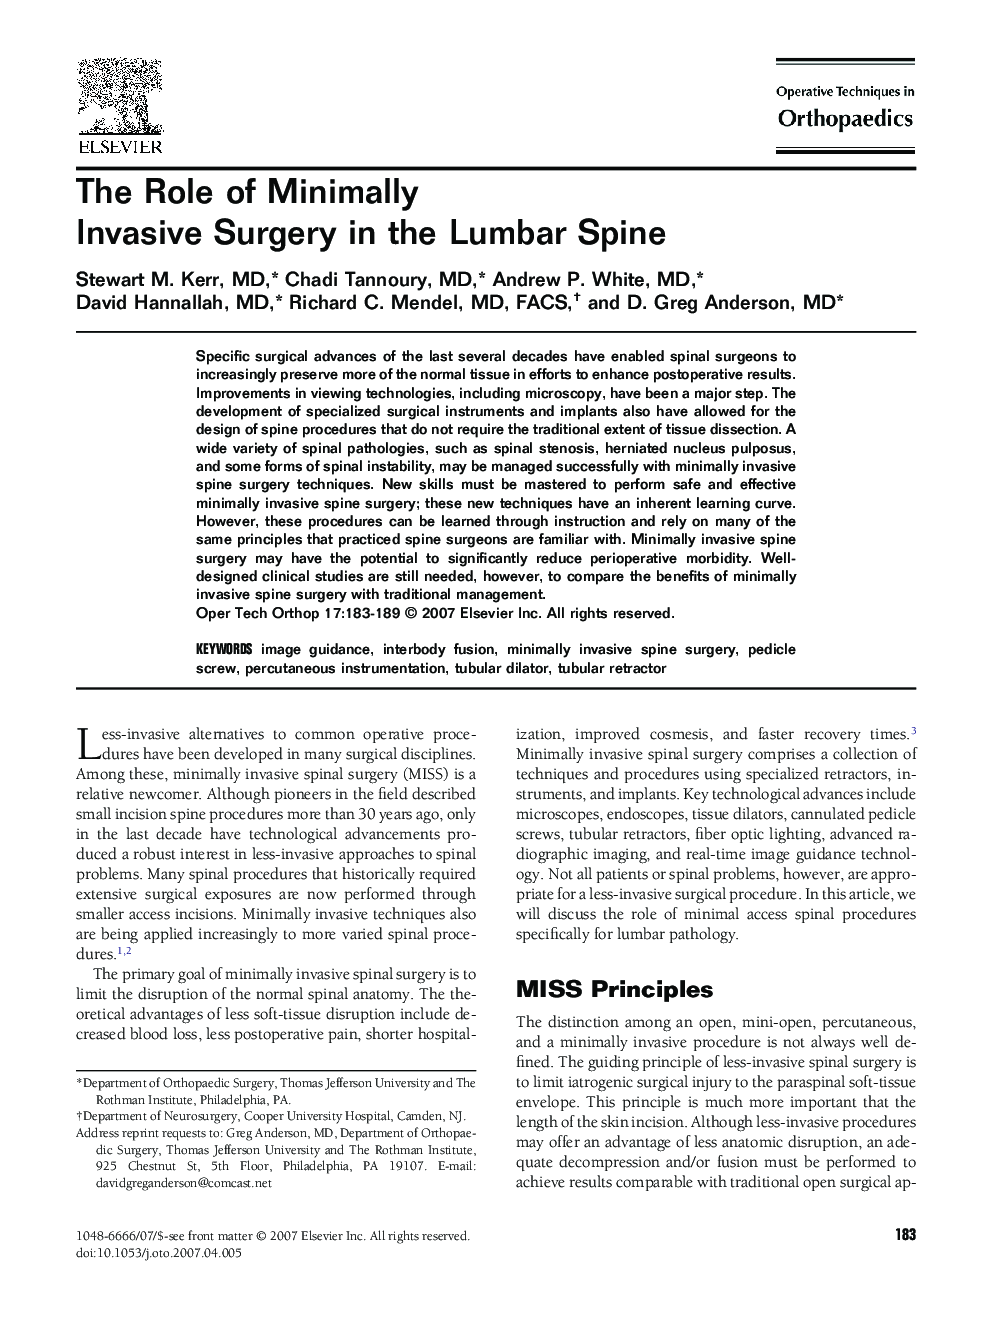 The Role of Minimally Invasive Surgery in the Lumbar Spine